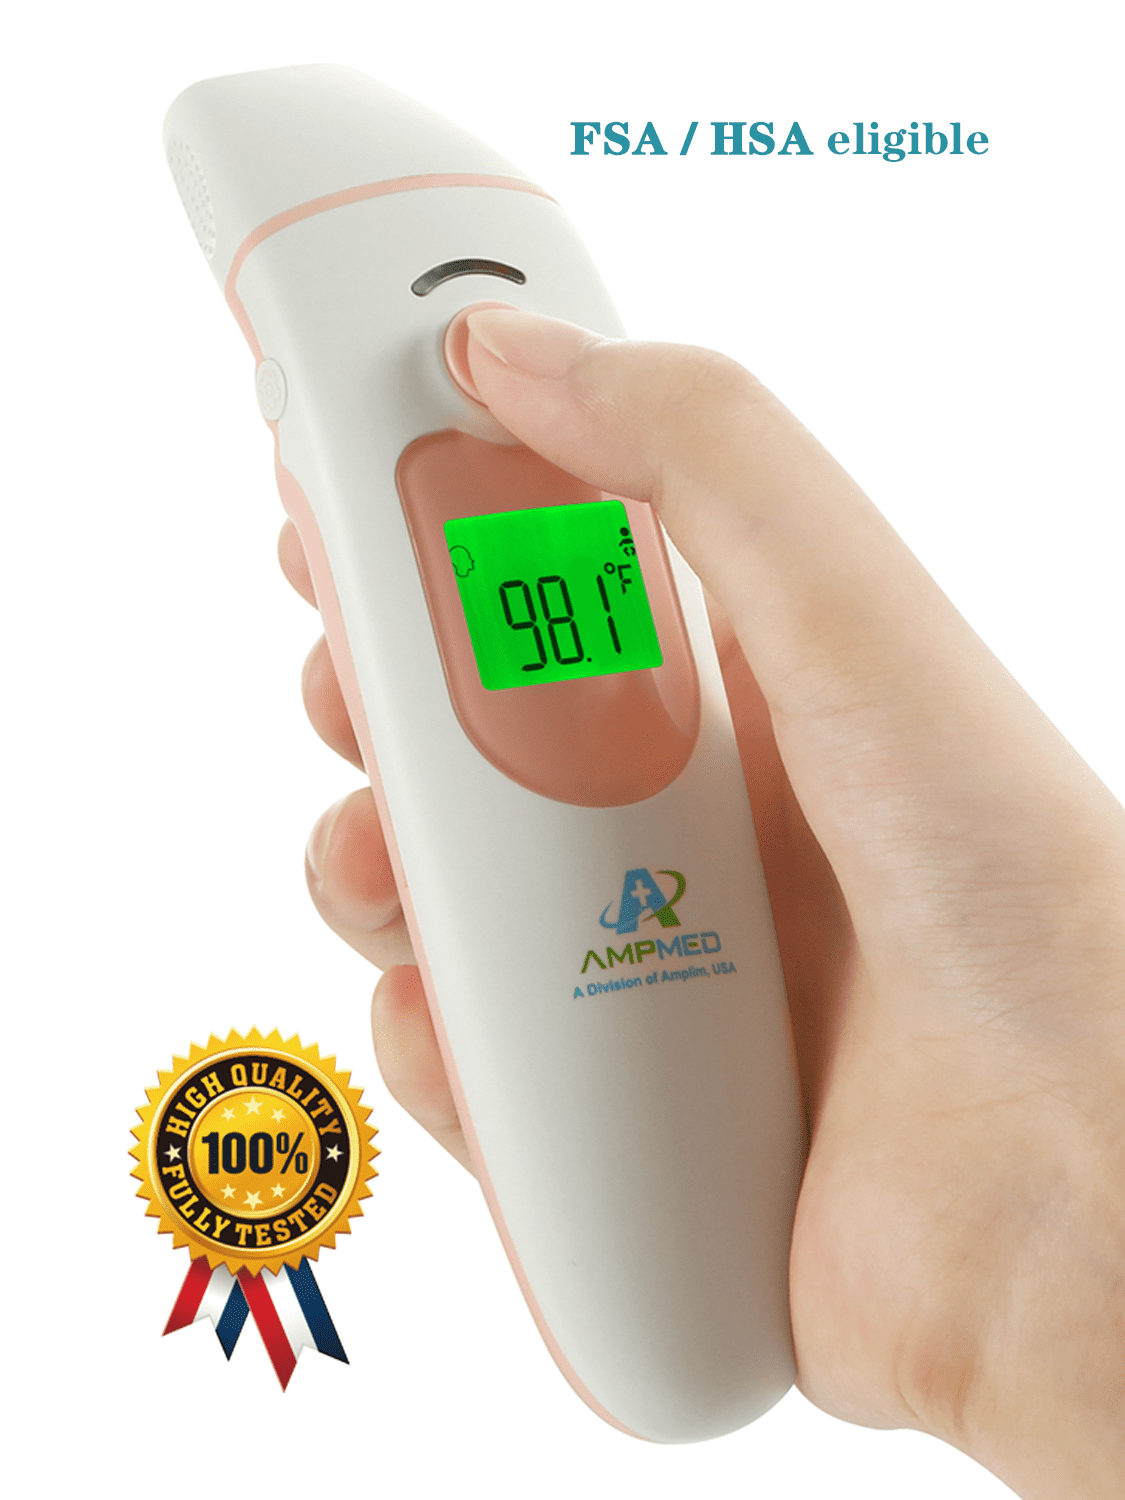 MOBI Ultra Pulse Talking Thermometer is Easy to Use and Takes a